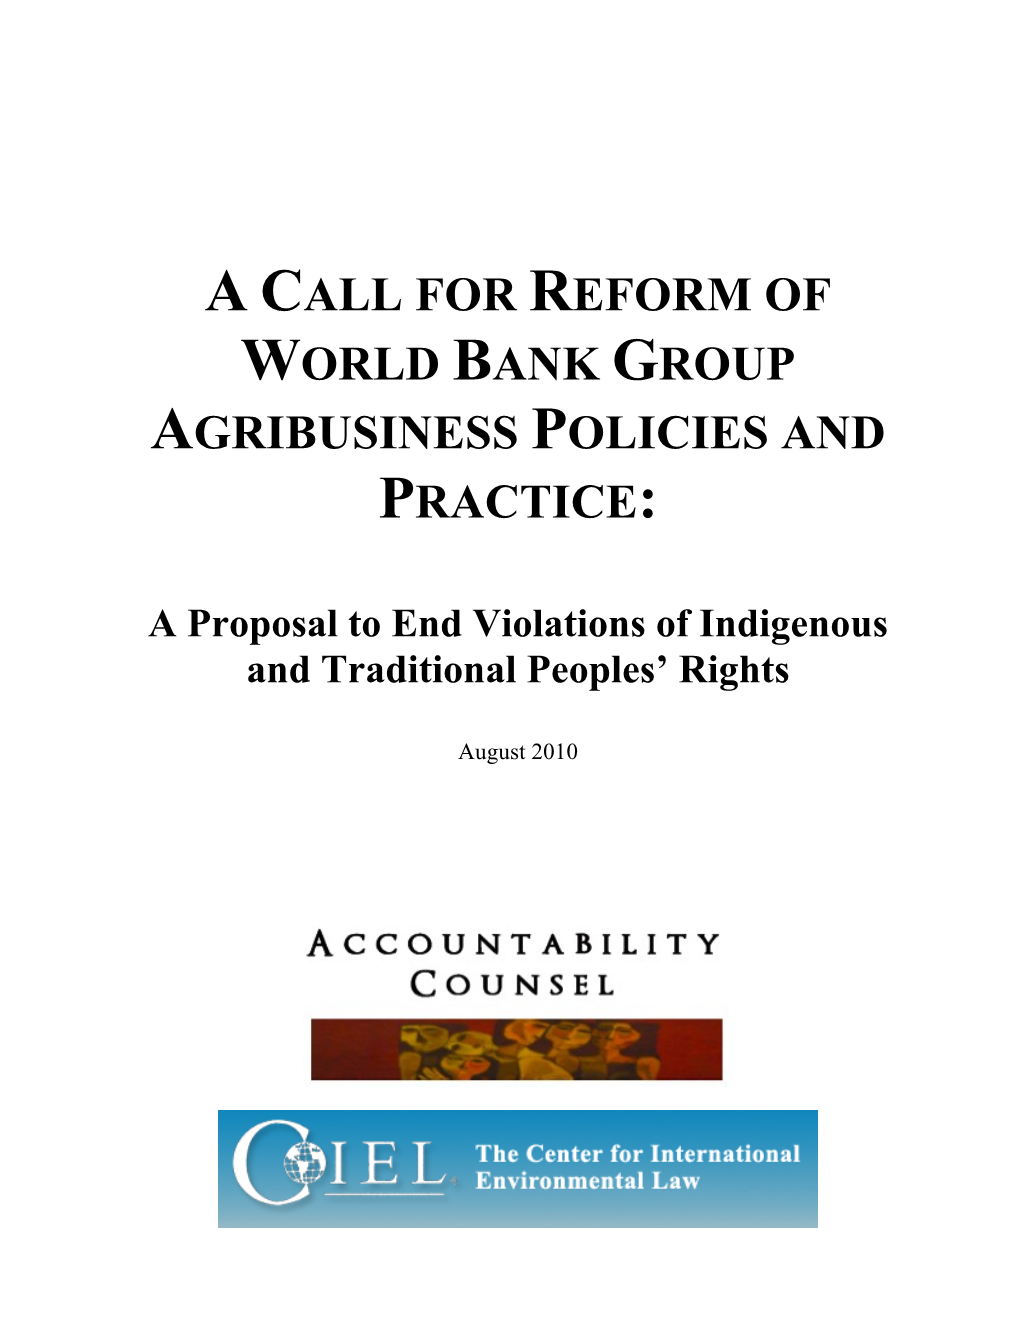 A Call for Reform of World Bank Group Agribusiness Policies and Practice